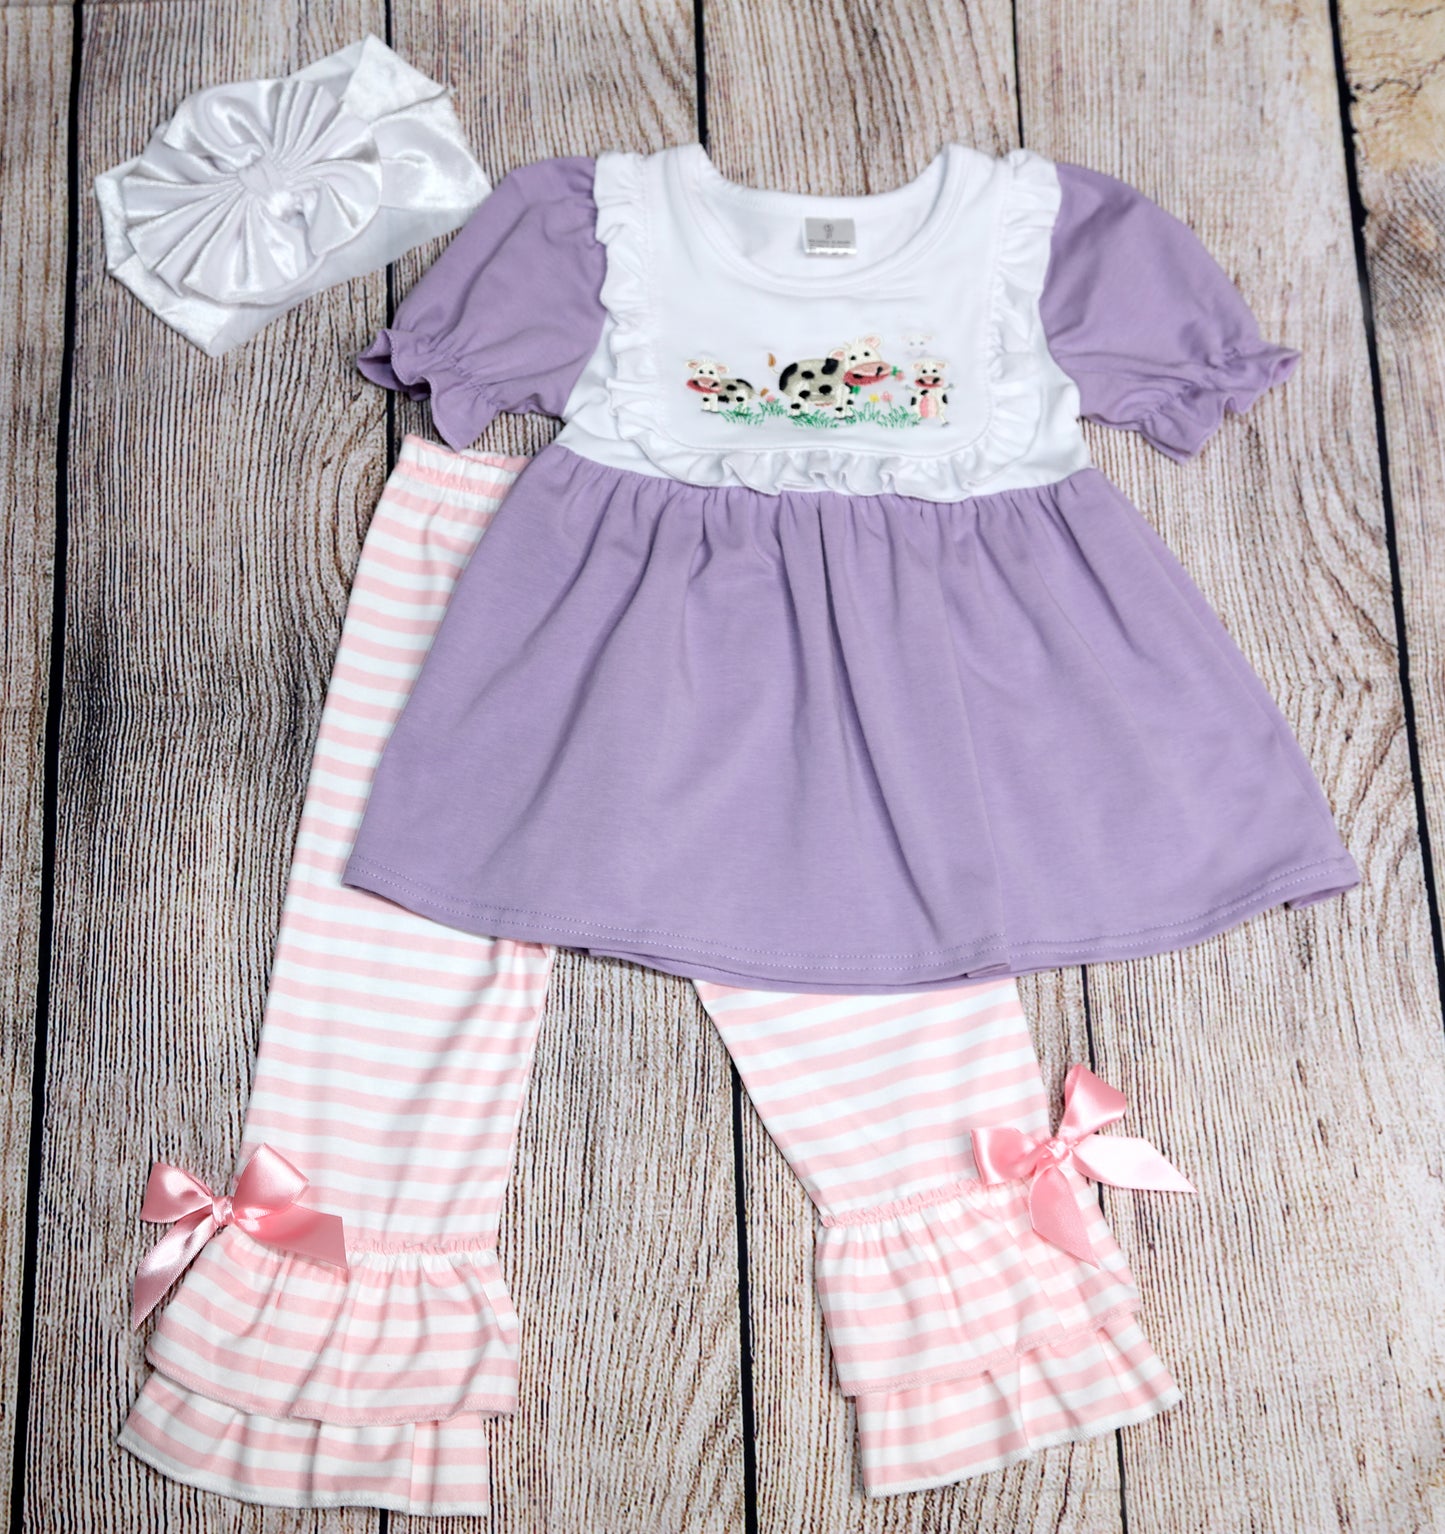 Molly purple cow outfit